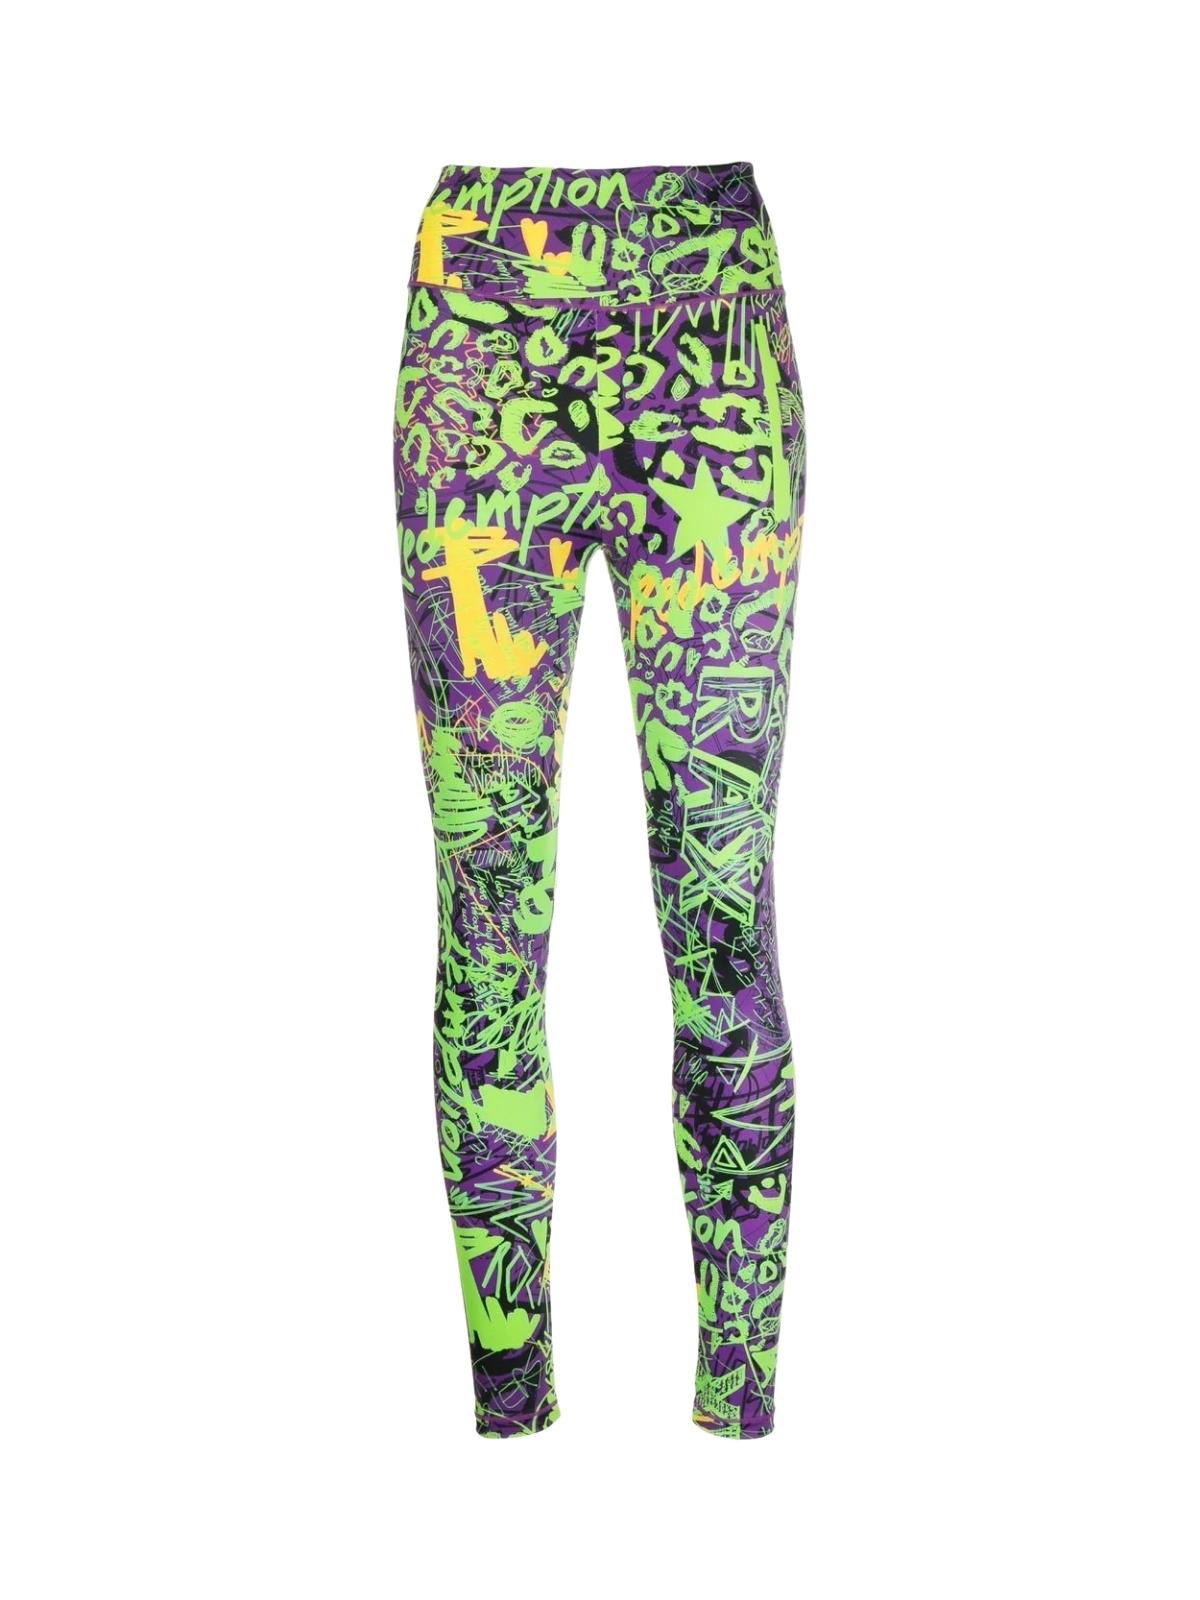 REDEMPTION Printed Lycra Liggings Trousers